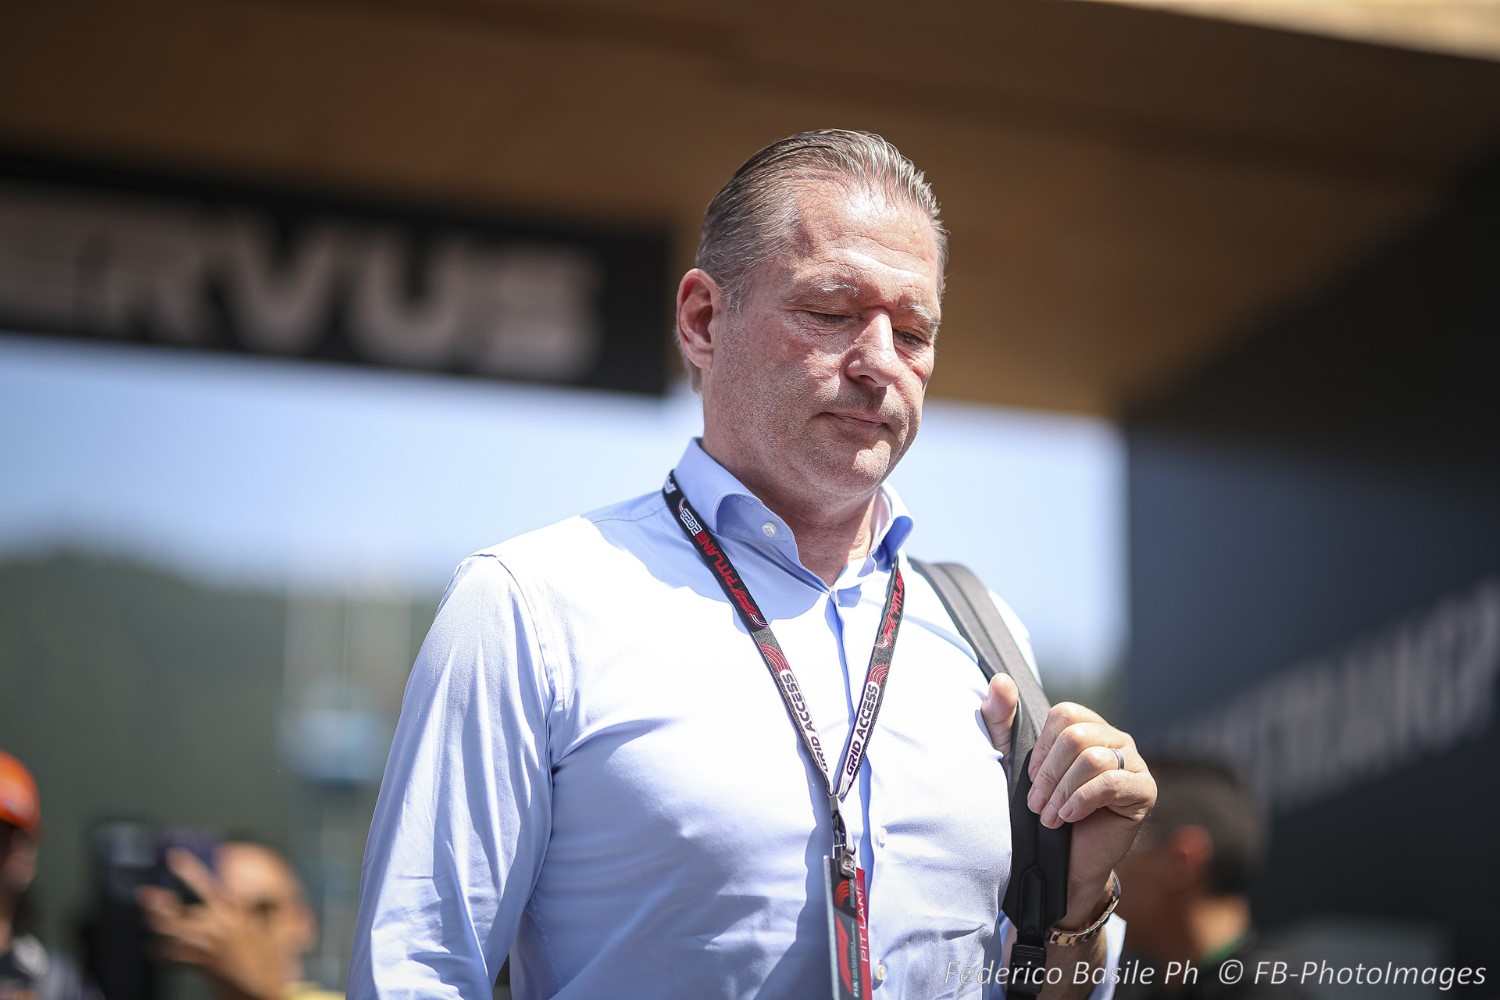 Jos Verstappen (NED) father of Max Verstappen Red Bull Racing Honda, and former F1 driver, for Arrows; Tyrrel; Benetton; Footwork; and Minardi, during the Austrian GP, Spielberg 29 June-2 July 2023 at the Red Bull Ring, Formula 1 World championship 2023.